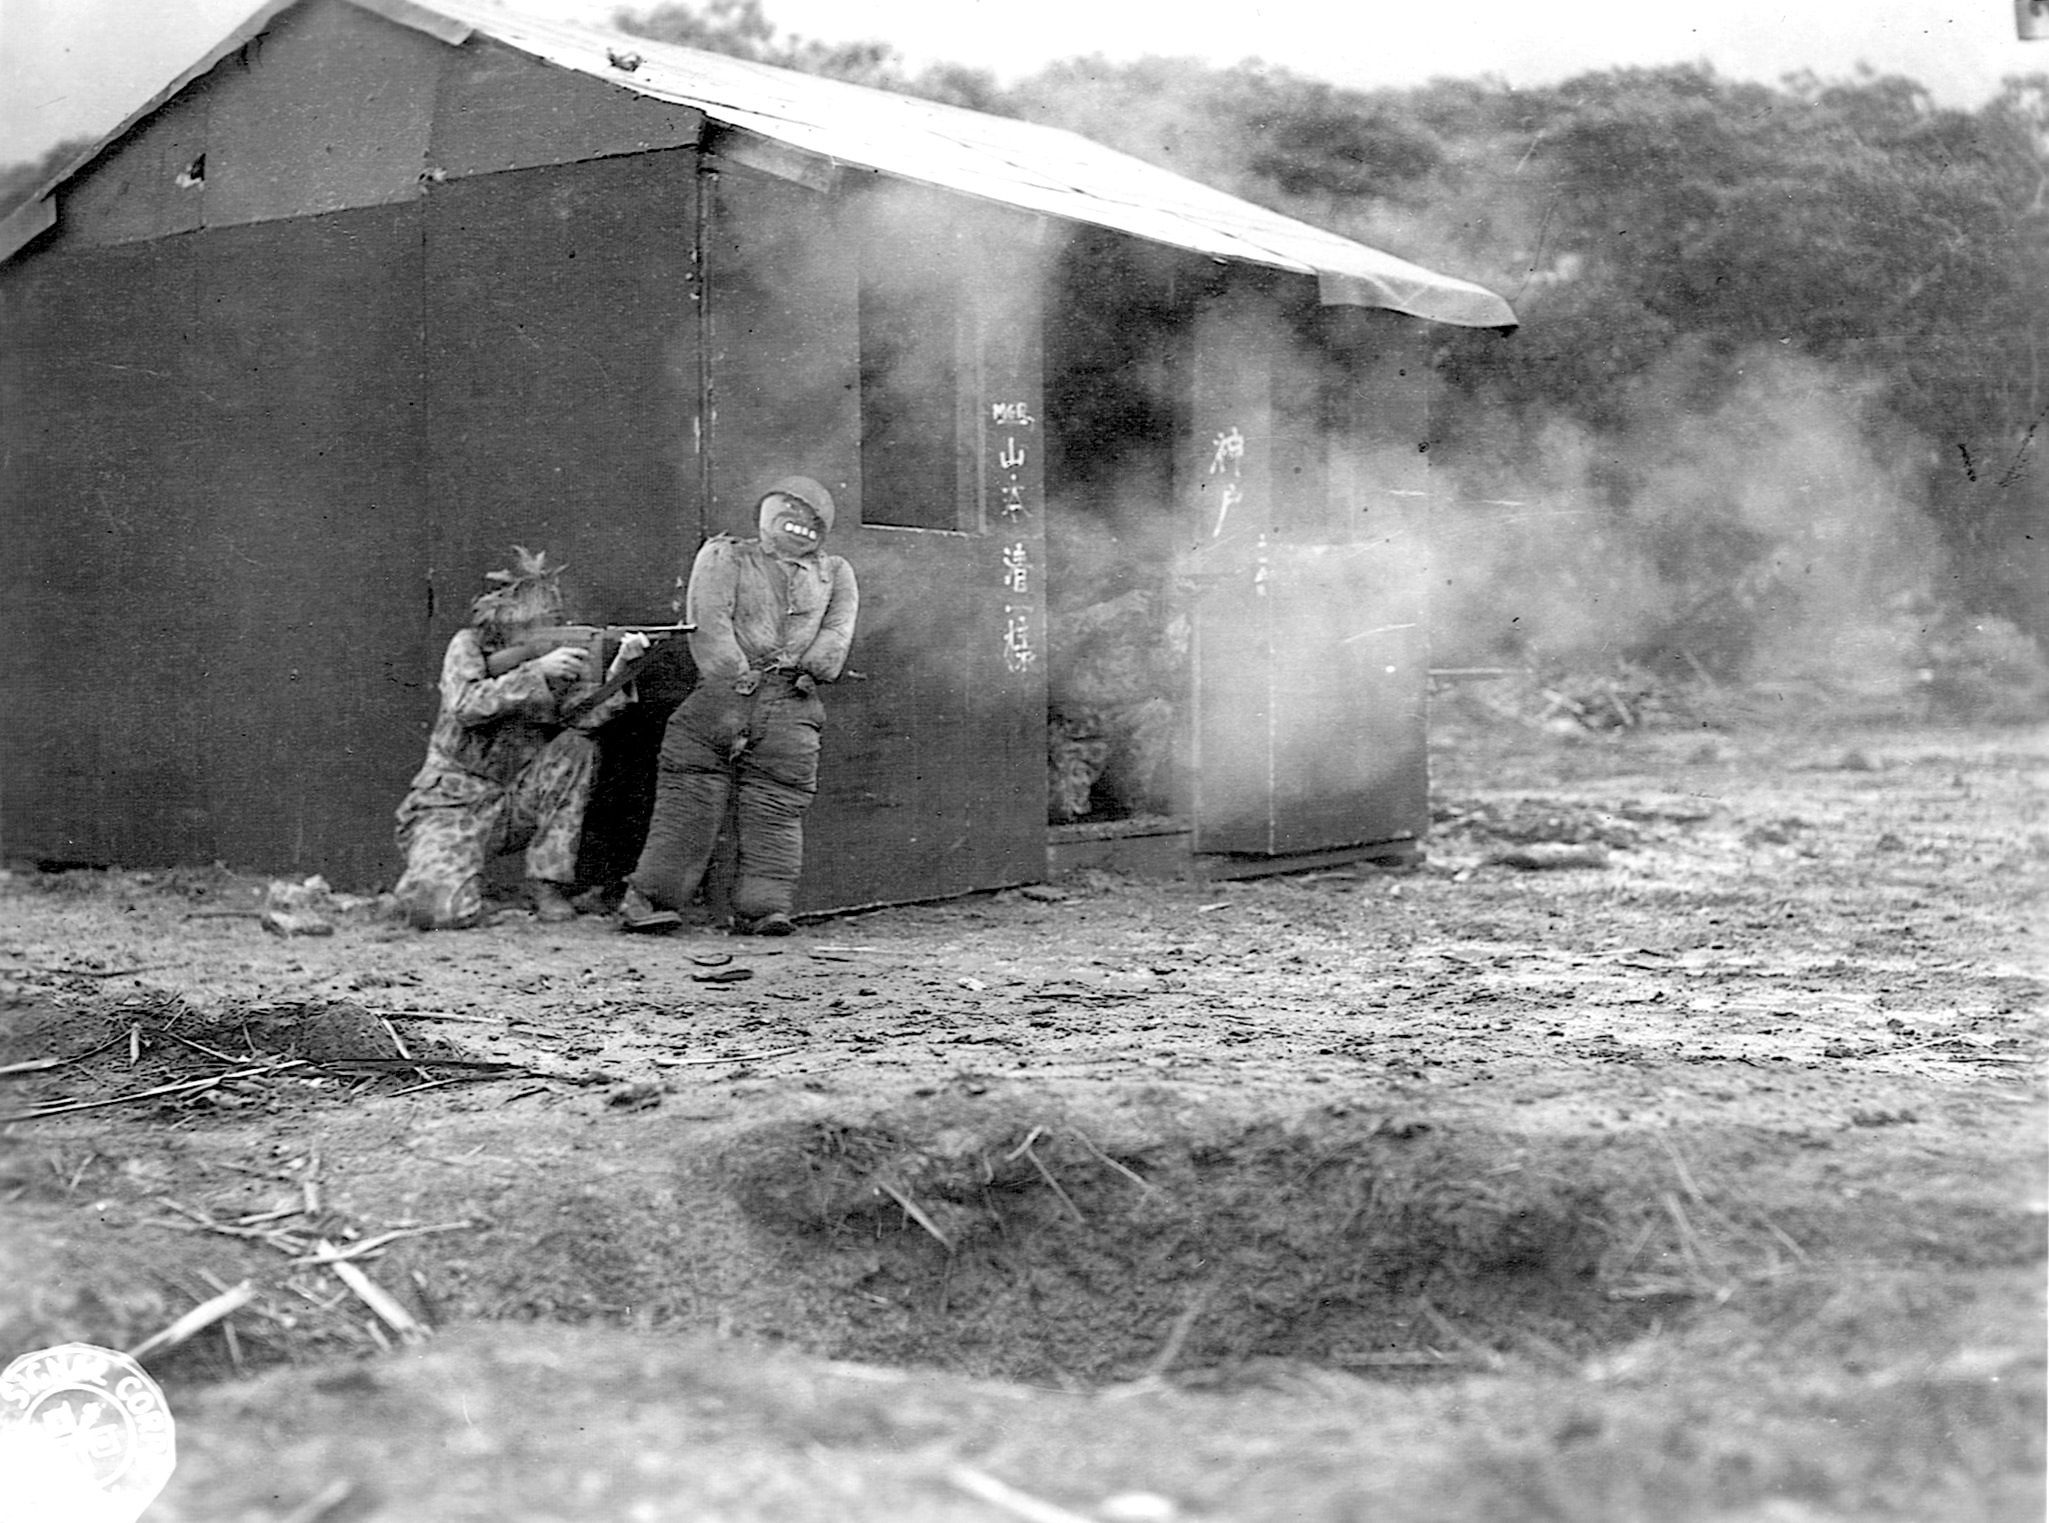 Firing Thompson submachine guns, well-camouflaged soldiers clear a street before advancing. The disarmed Japanese soldier is one of the stereotyped mockups.